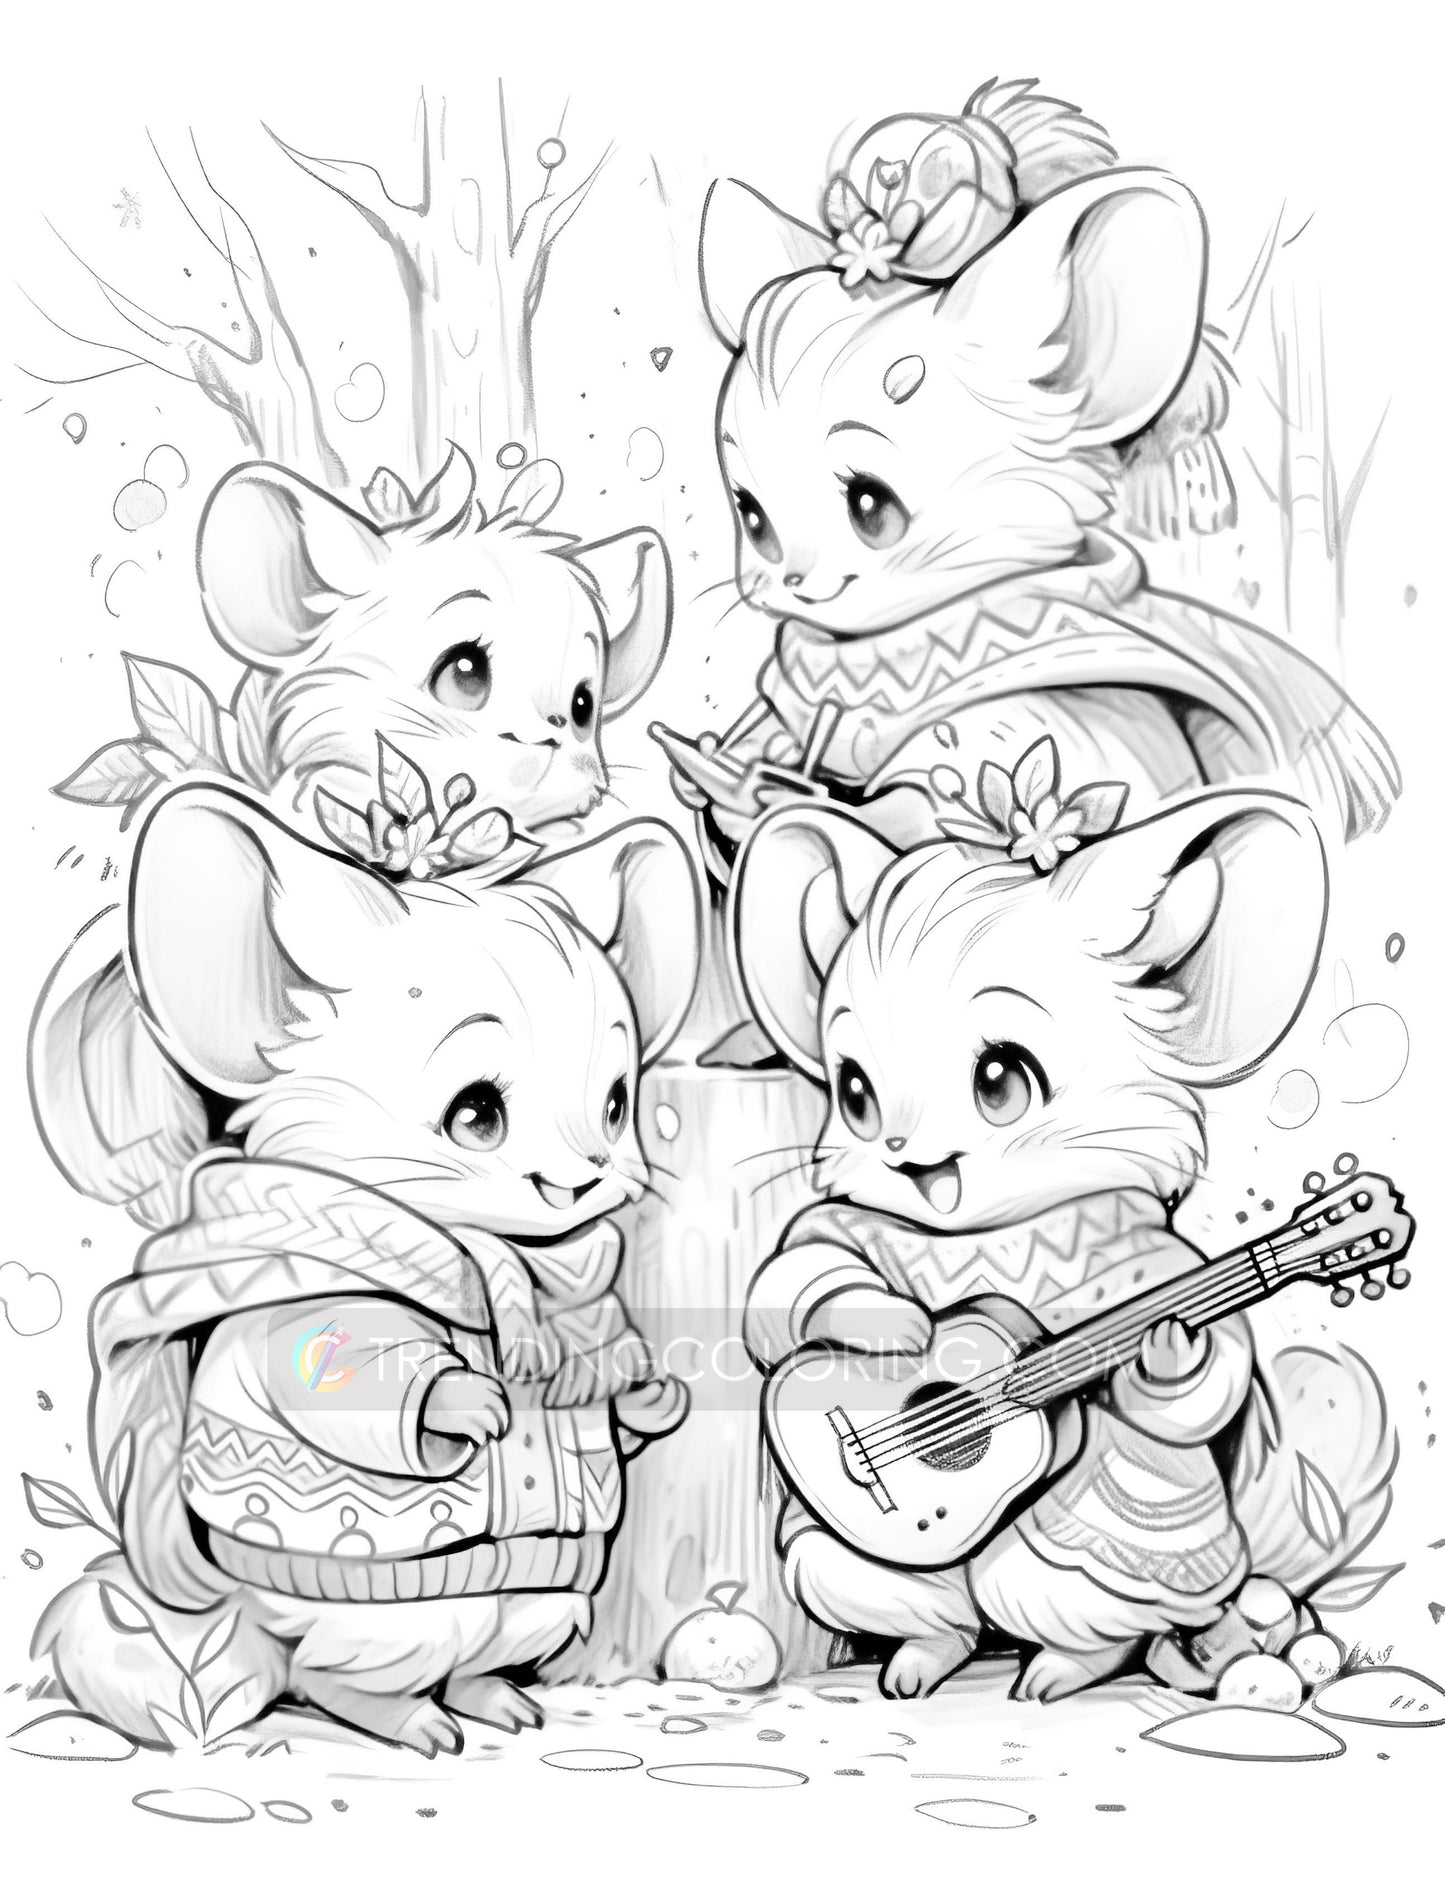 50 Christmas Little Mouse Grayscale Coloring Pages - Instant Download - Printable PDF Dark/Light